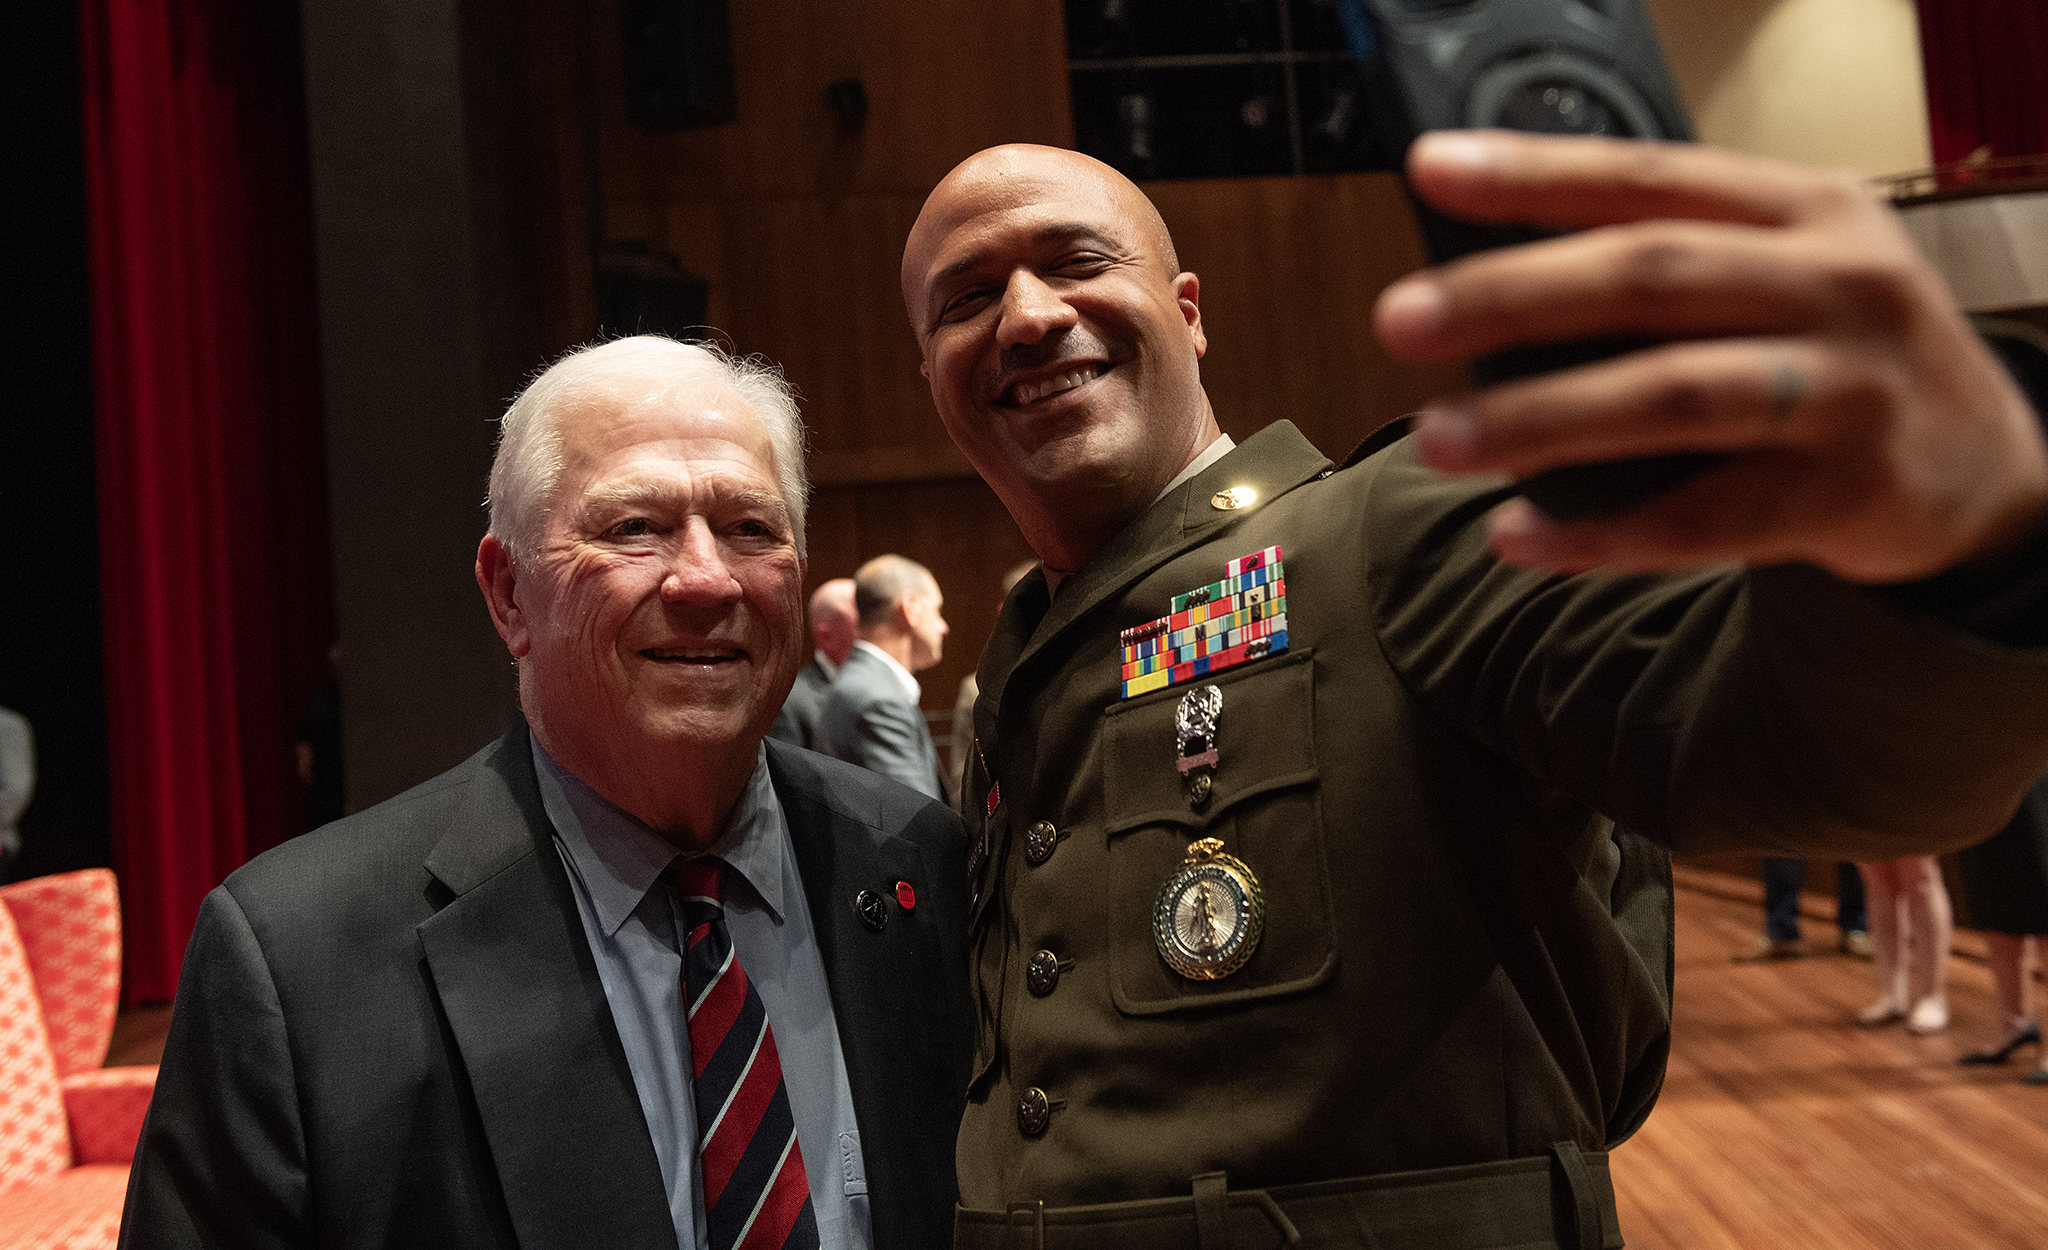 Master Sgt. Anthony Douglas (right), operations coordinator for UM Veteran and Military Services and recruiting and retention section chief for the Mississippi Army National Guard, poses for a photo with former Mississippi Gov. Haley Barbour after the ‘Follow Me: Citizens, Soldiers and Crisis Leadership’ panel Sept. 14 at the Gertrude C. Ford Center for the Performing Arts. Photo By Thomas Graning/Ole Miss Digital Imaging Services